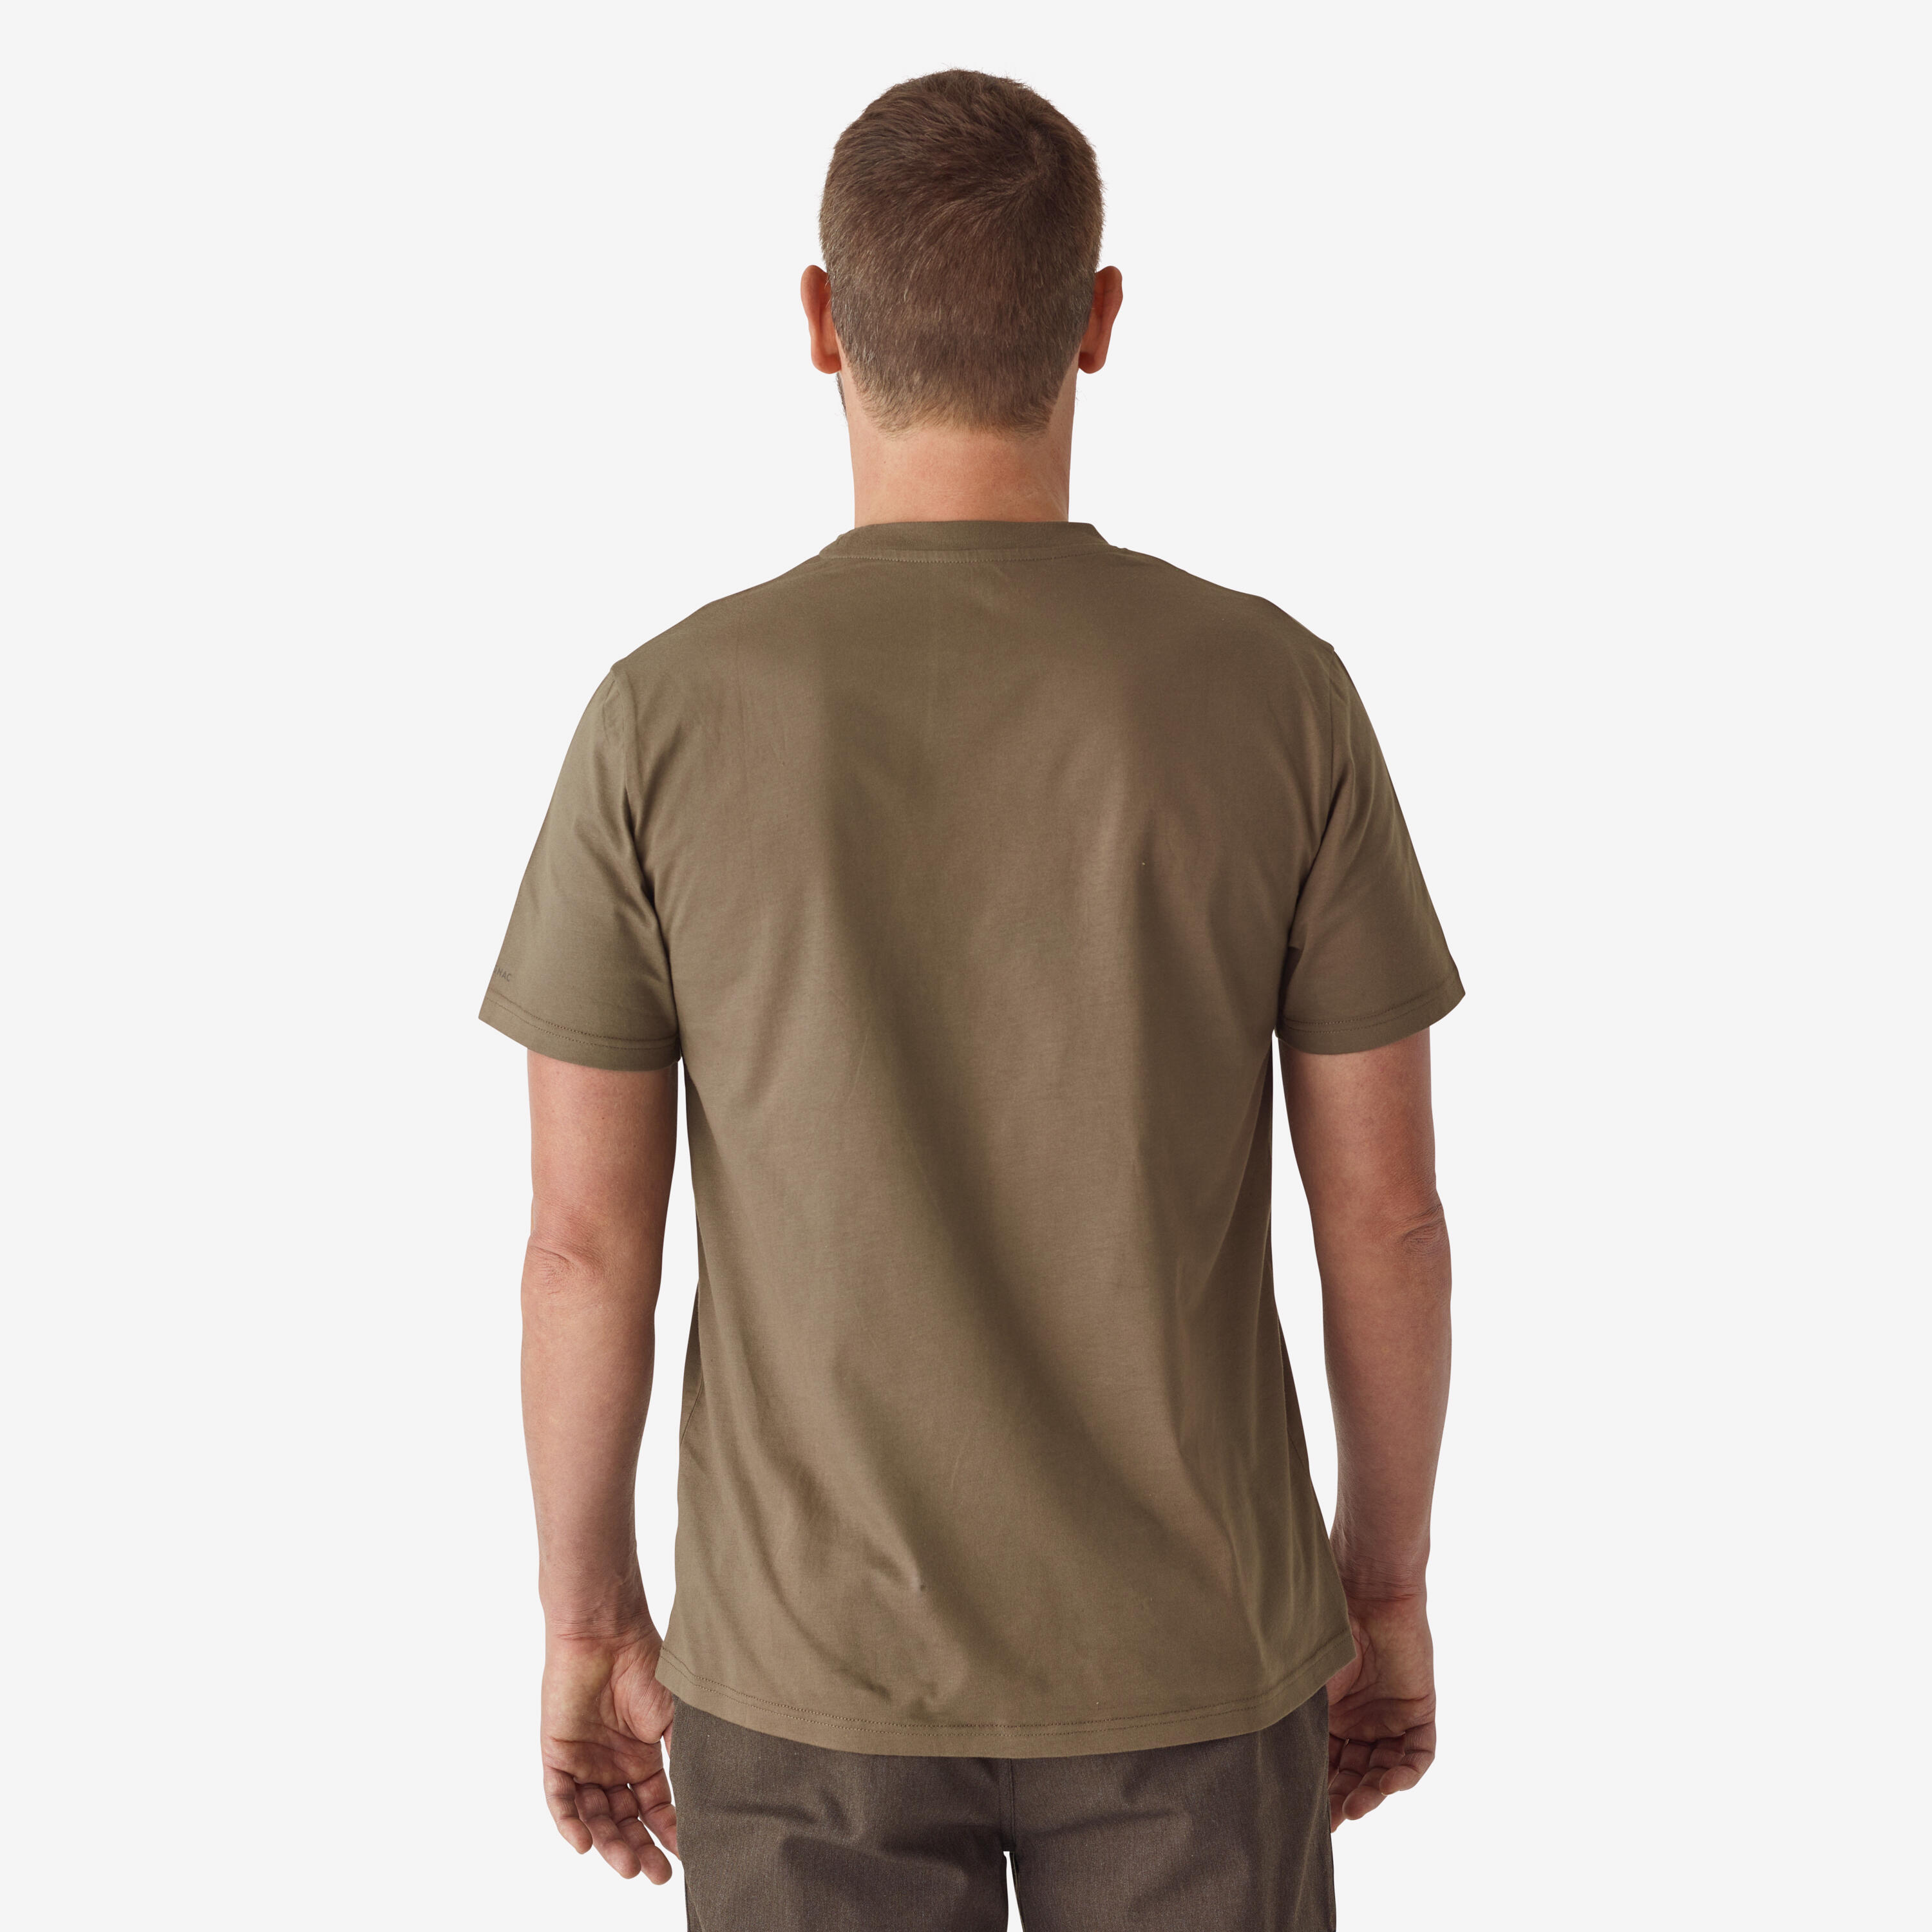 Short-sleeved cotton T-shirt 100 with WILDLIFE LOGO 2/3